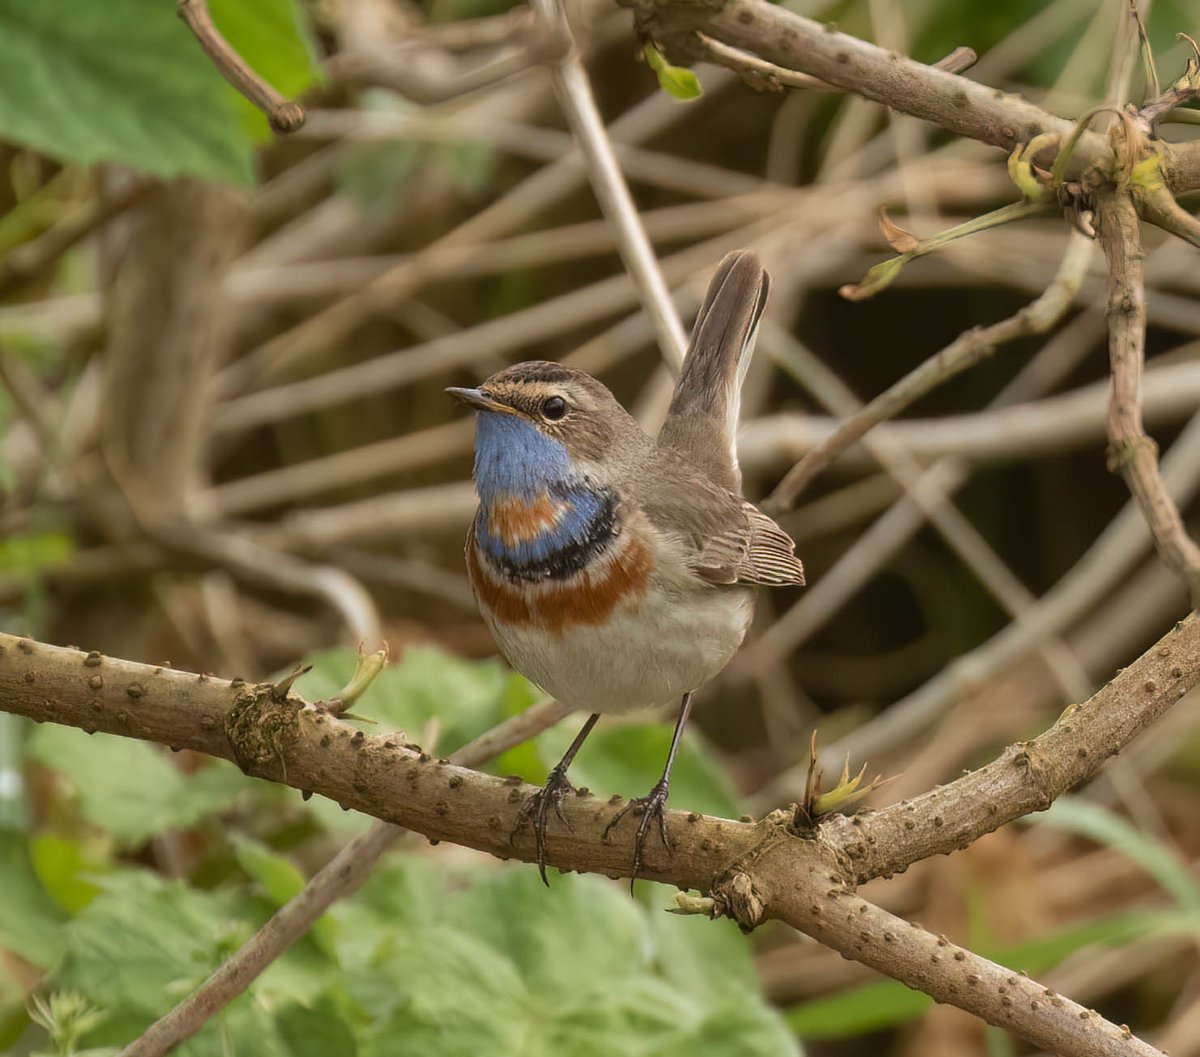 A few shots of the Bluethroat at Tynemouth today.